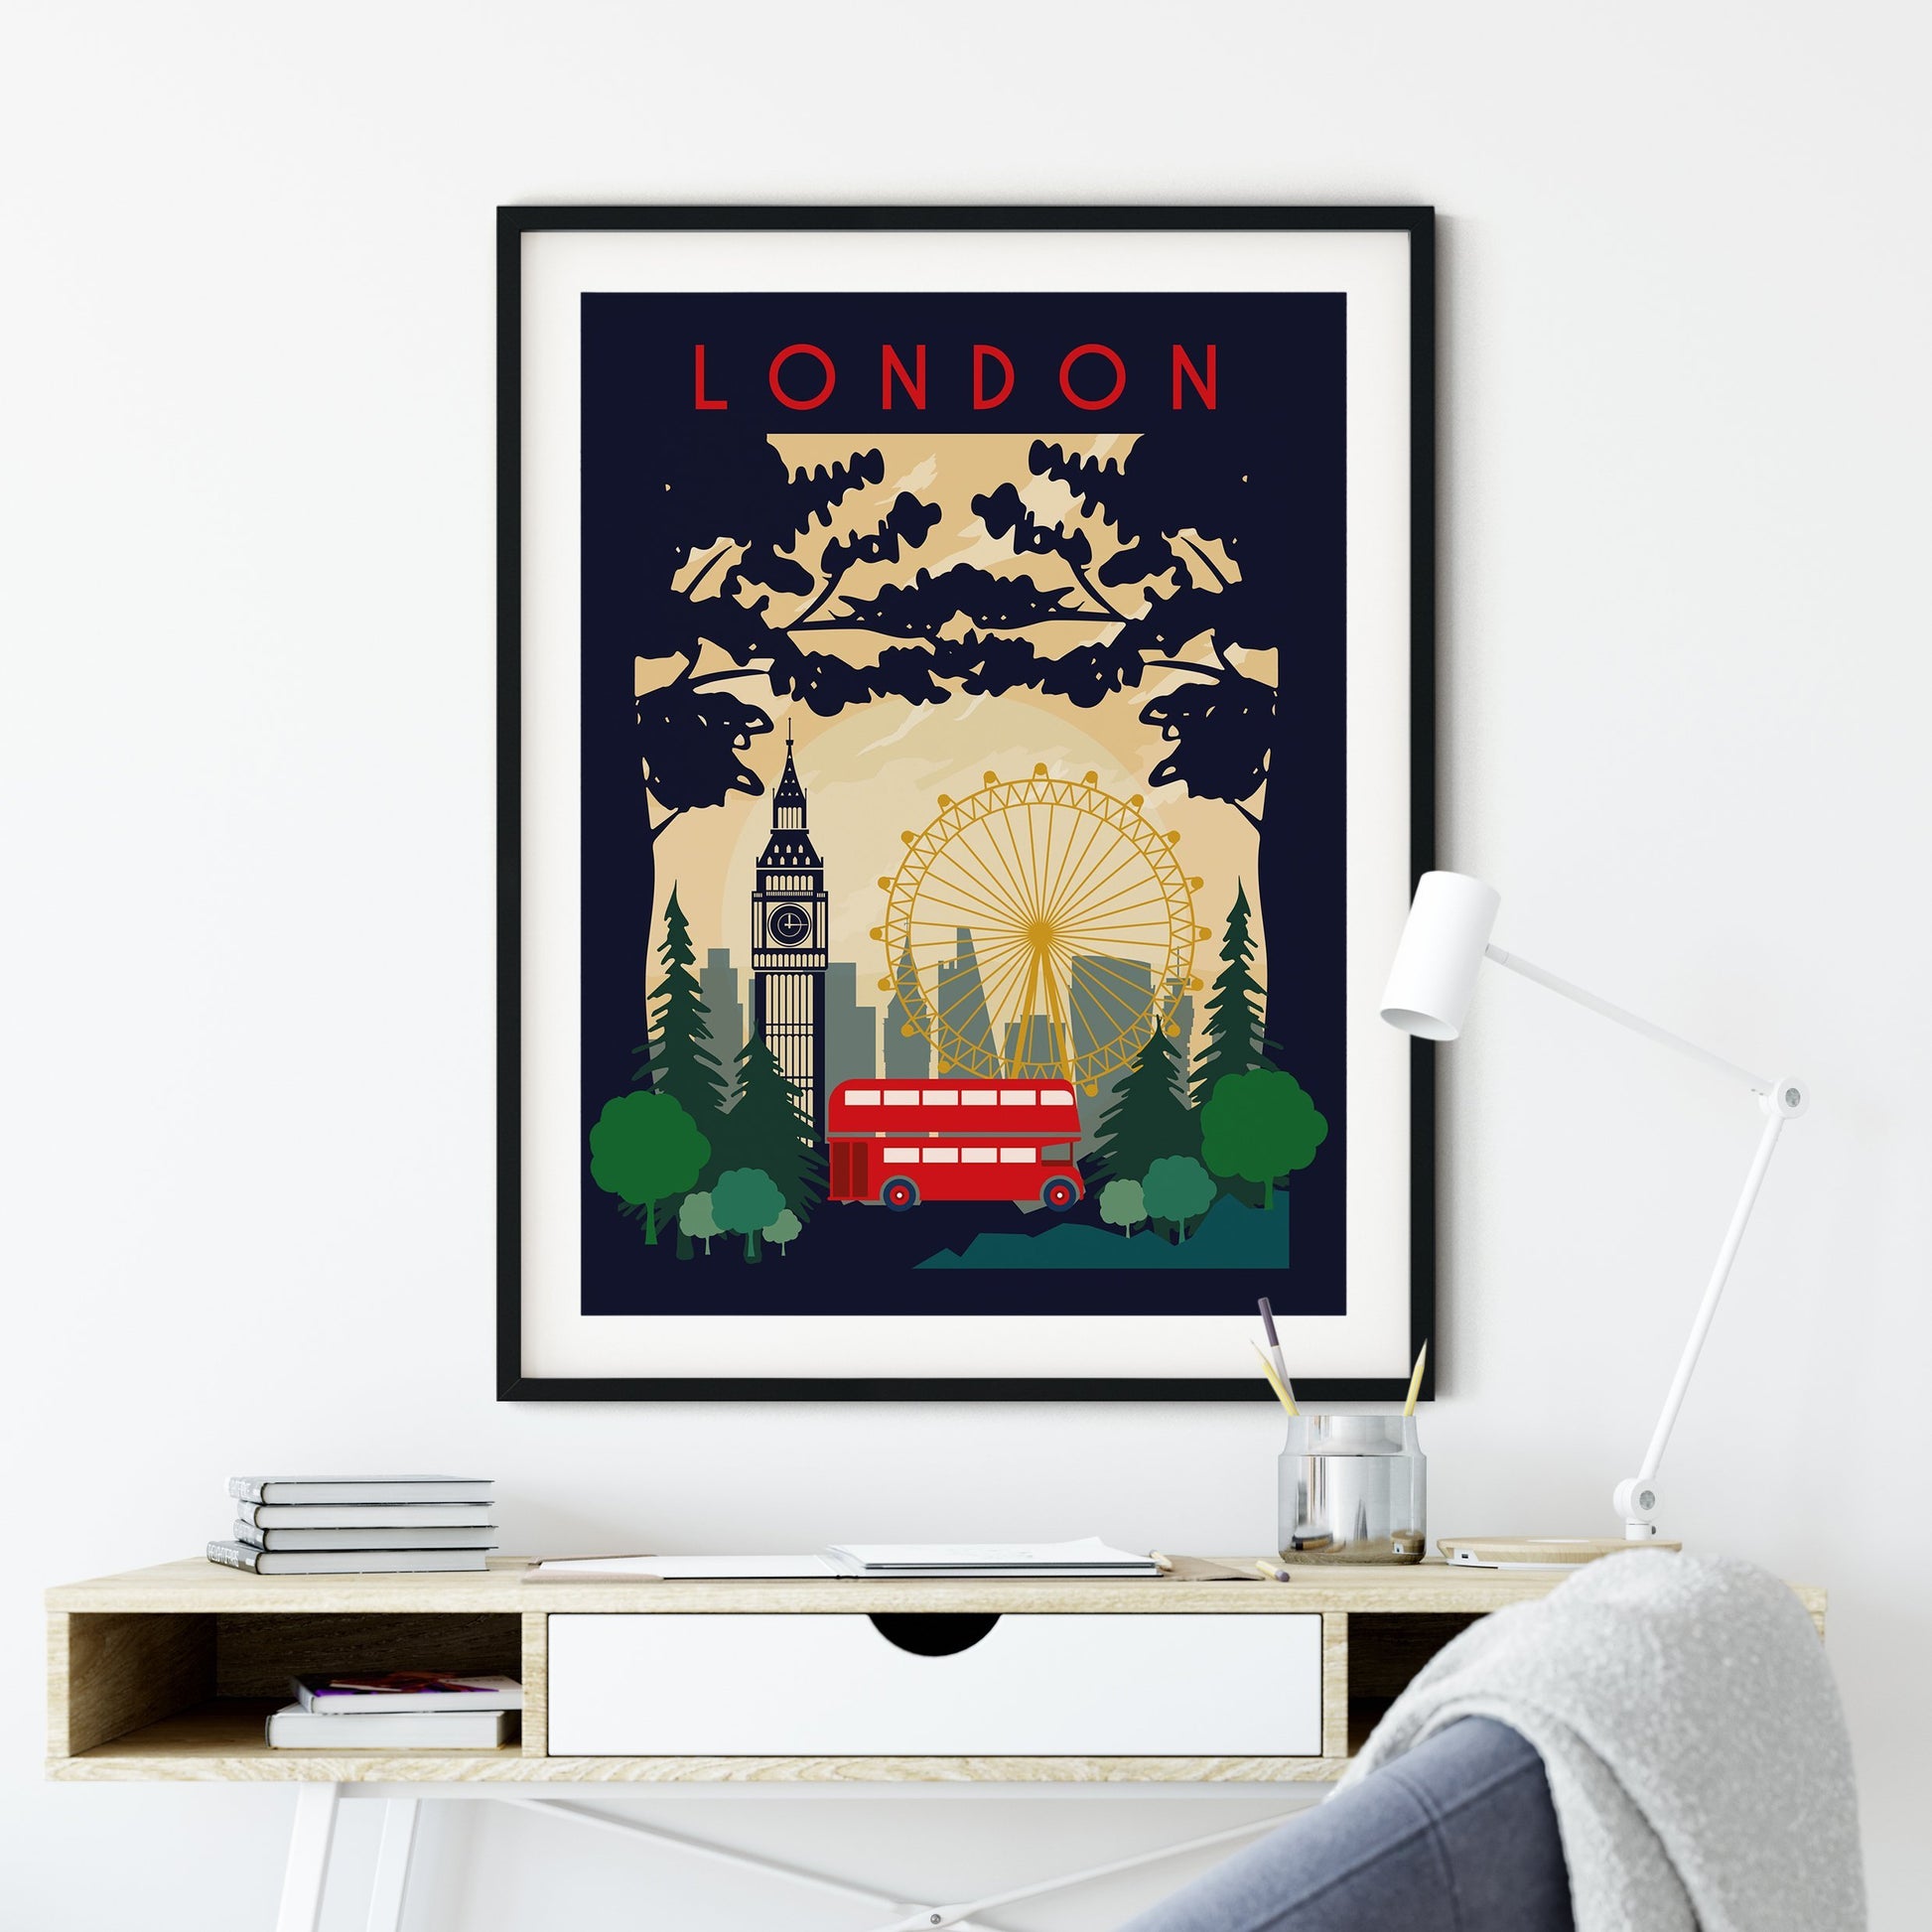 London Red Bus travel poster - 1